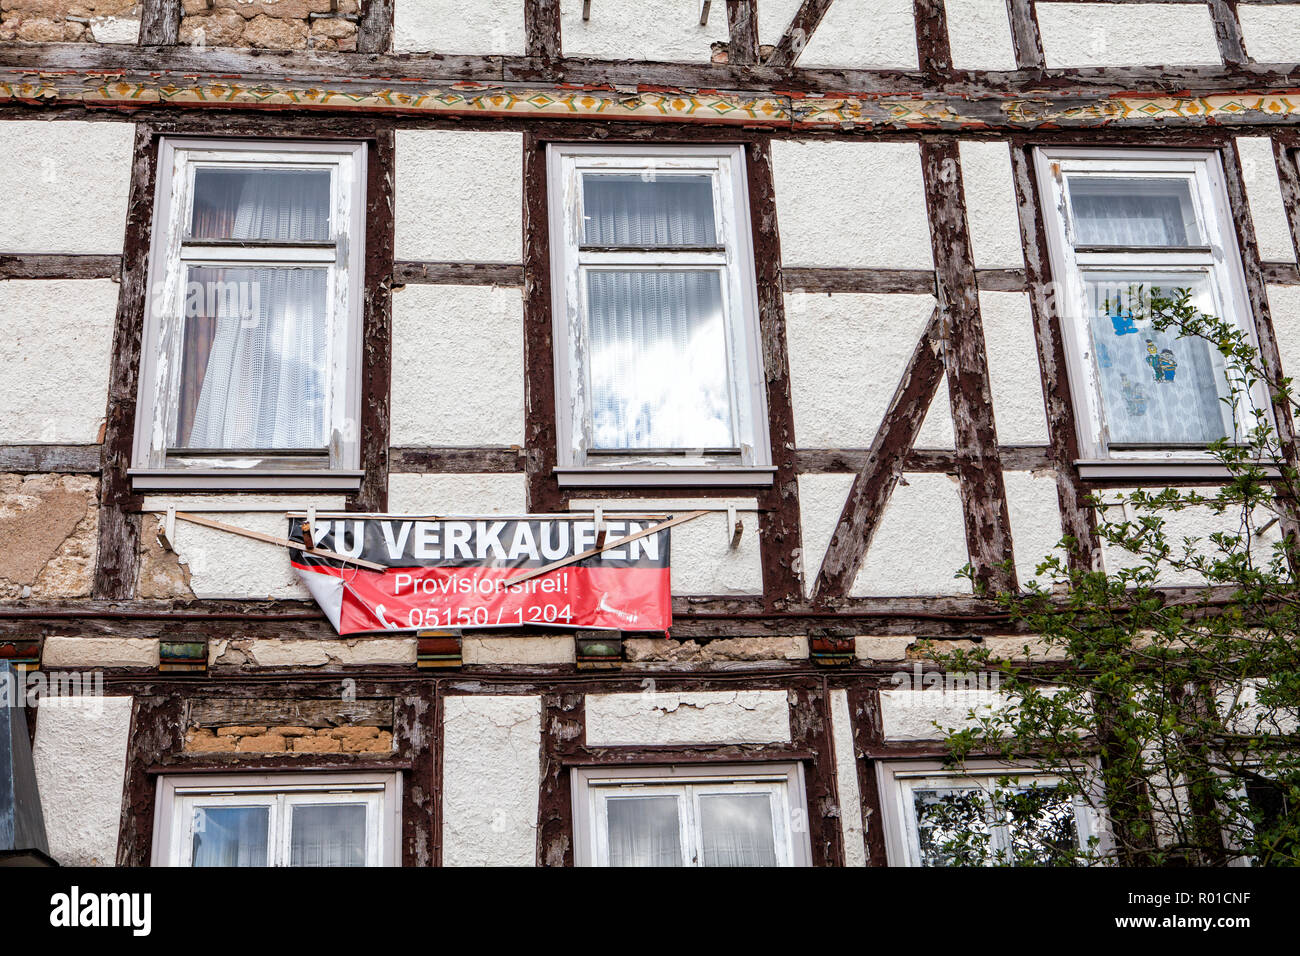 House for sale, bad condition, Bodenwerder, Weserbergland, Lower Saxony, Germany, Europe Stock Photo